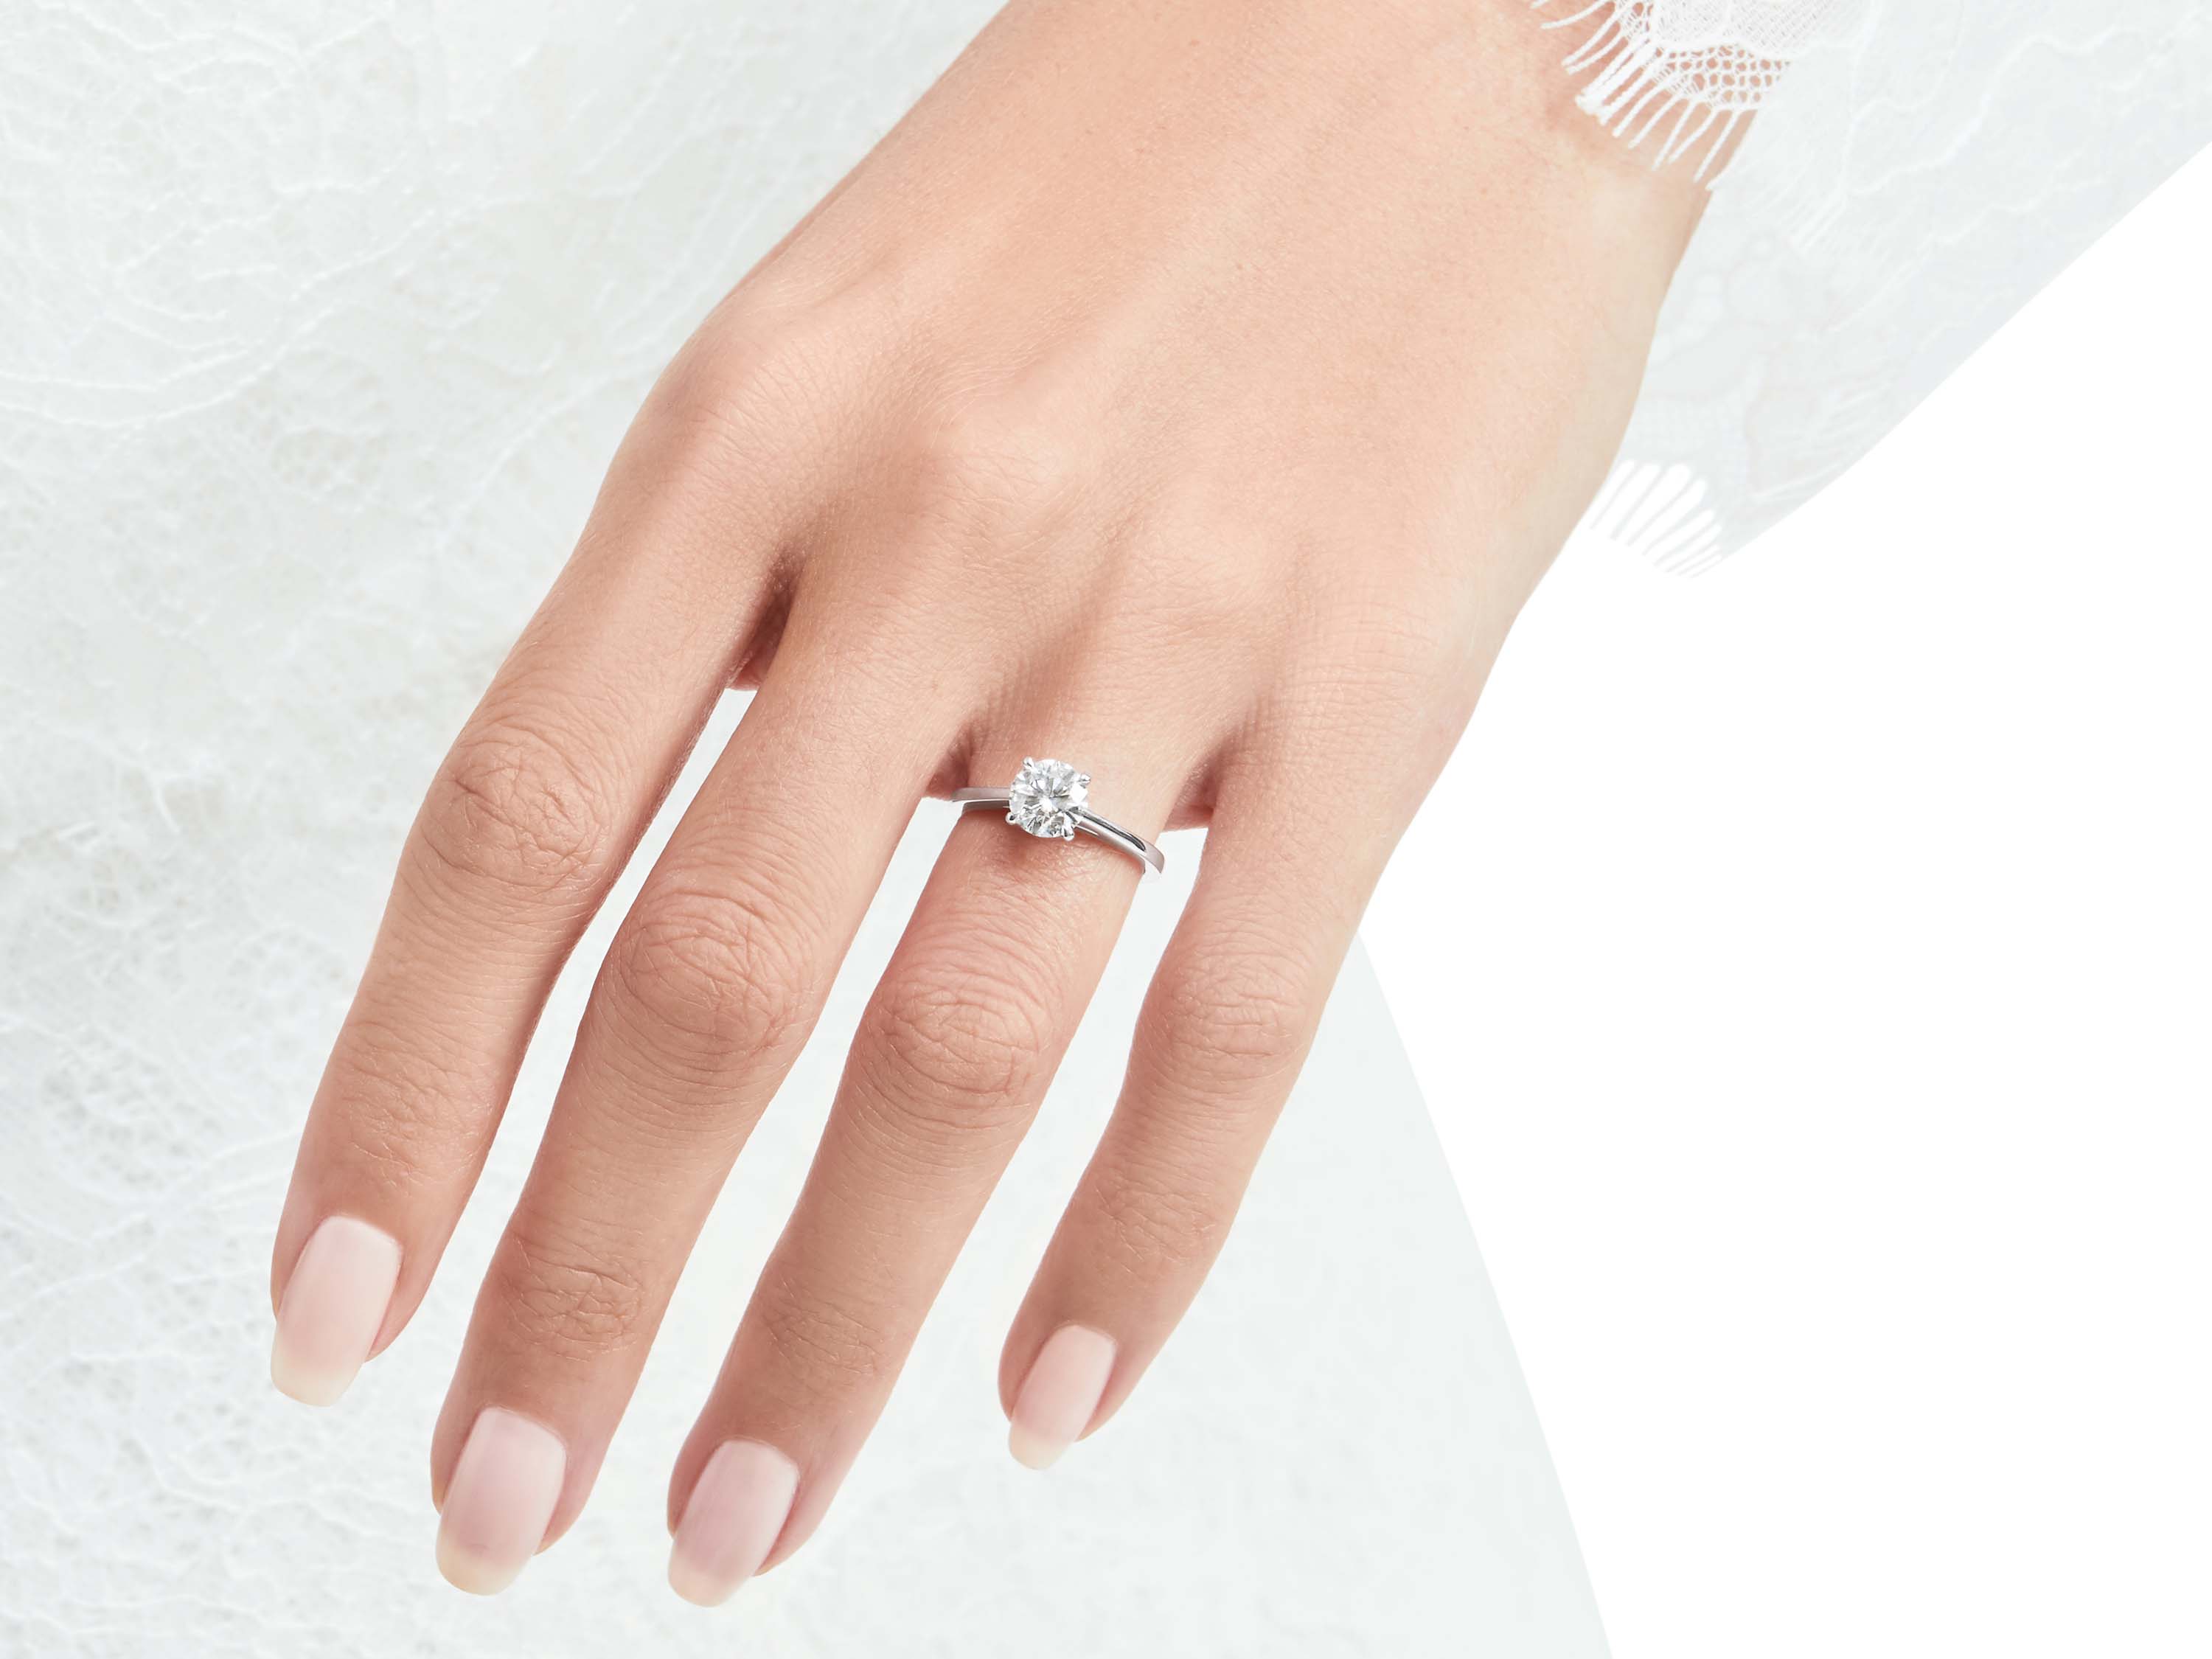 Model wears Paragon Round Diamond Engagement Ring from the Graff bridal jewellery collection